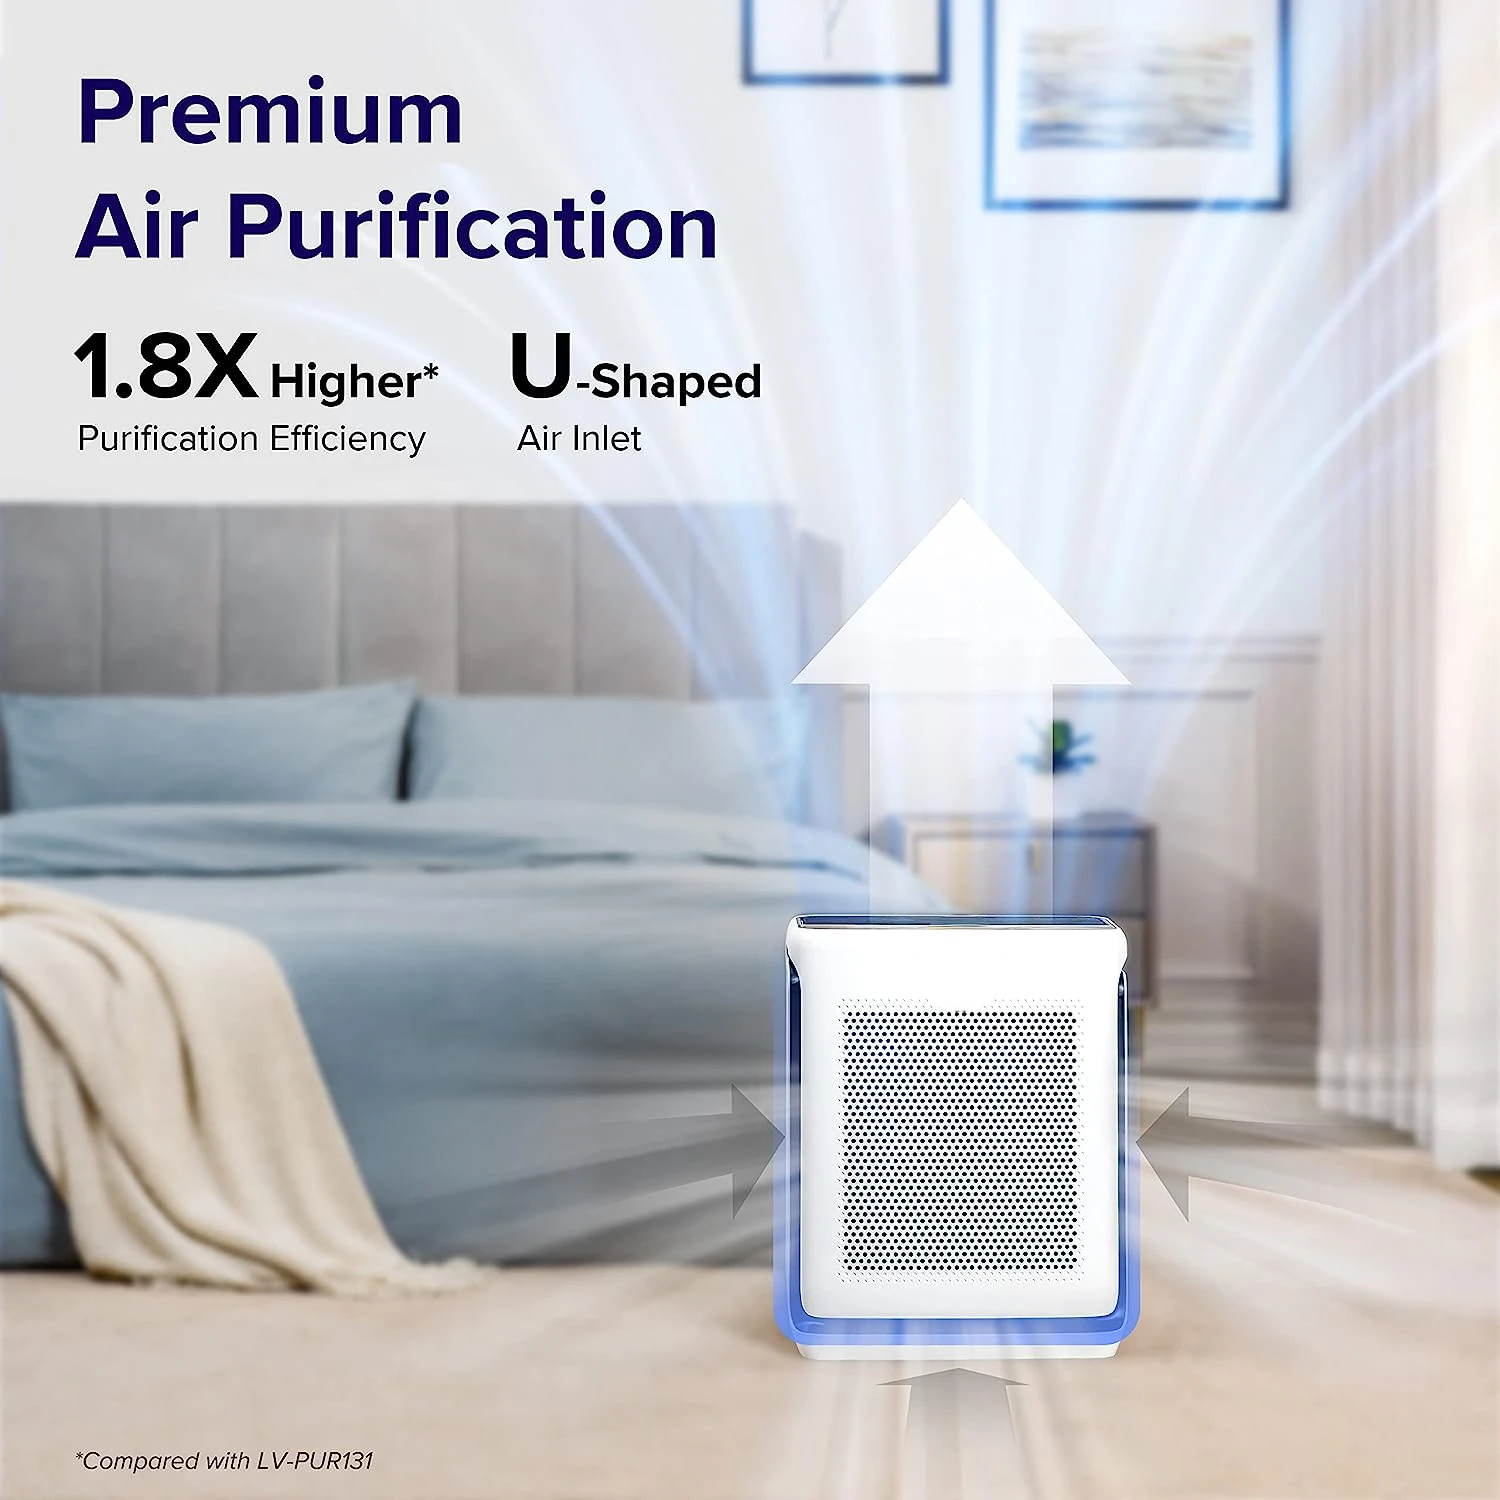 

Air Purifiers for Home Large Room Up to 1900 Ft² in 1 Hr with Washable Filters, Air Quality Monitor, Smart WiFi, HEPA Filter Ca